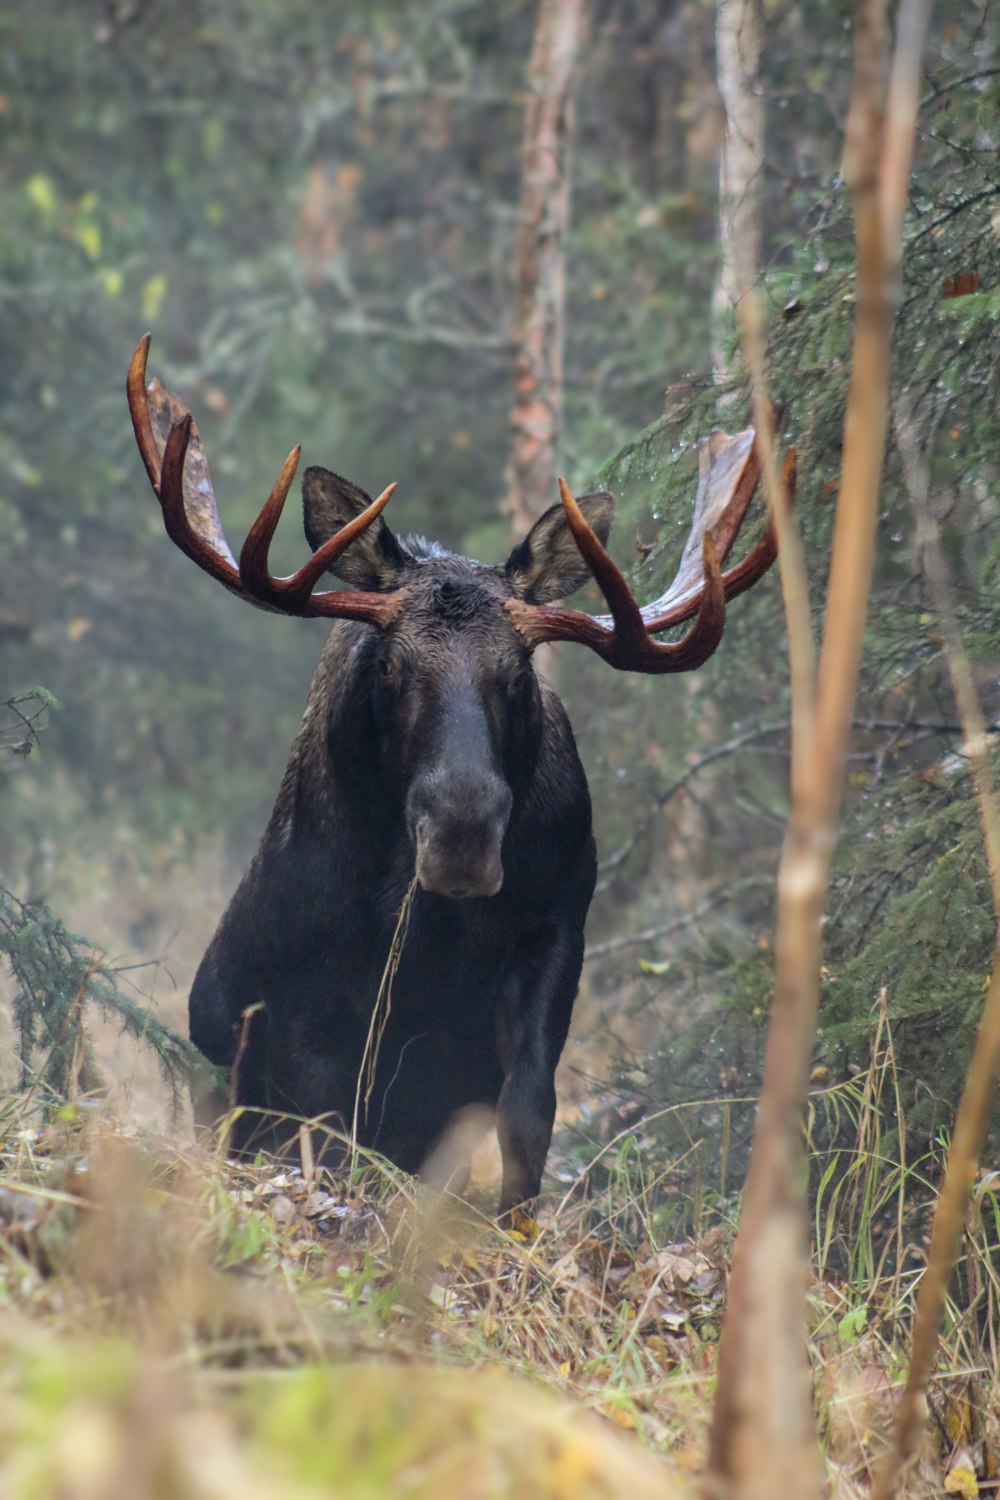 a moose with large antlers walking through a forest